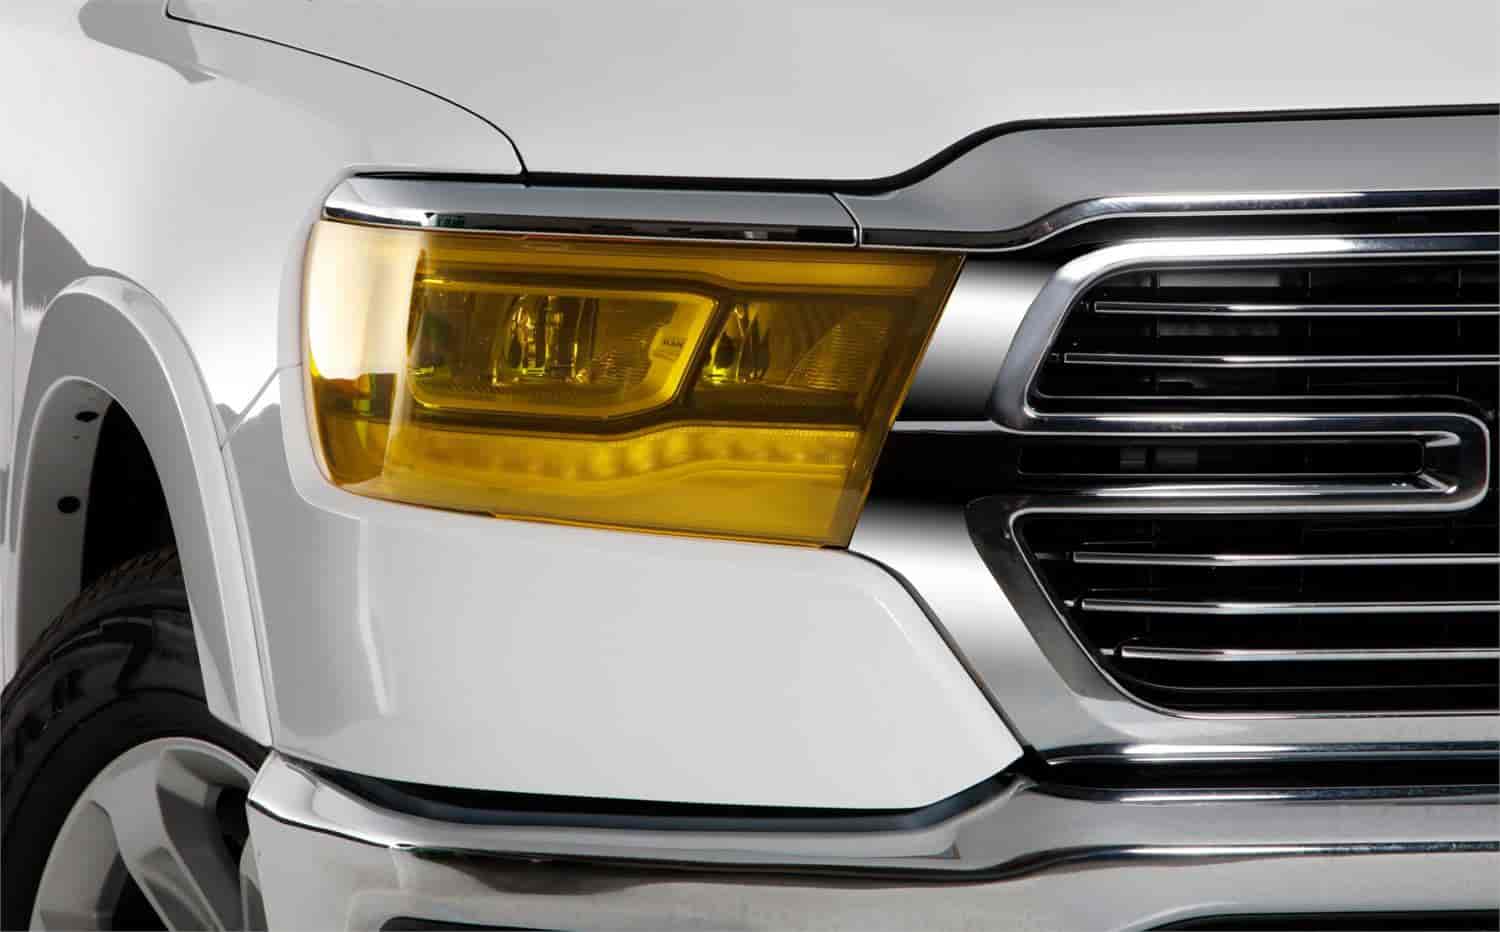 Transparent Yellow Headlight Covers For Select Late-Model Dodge